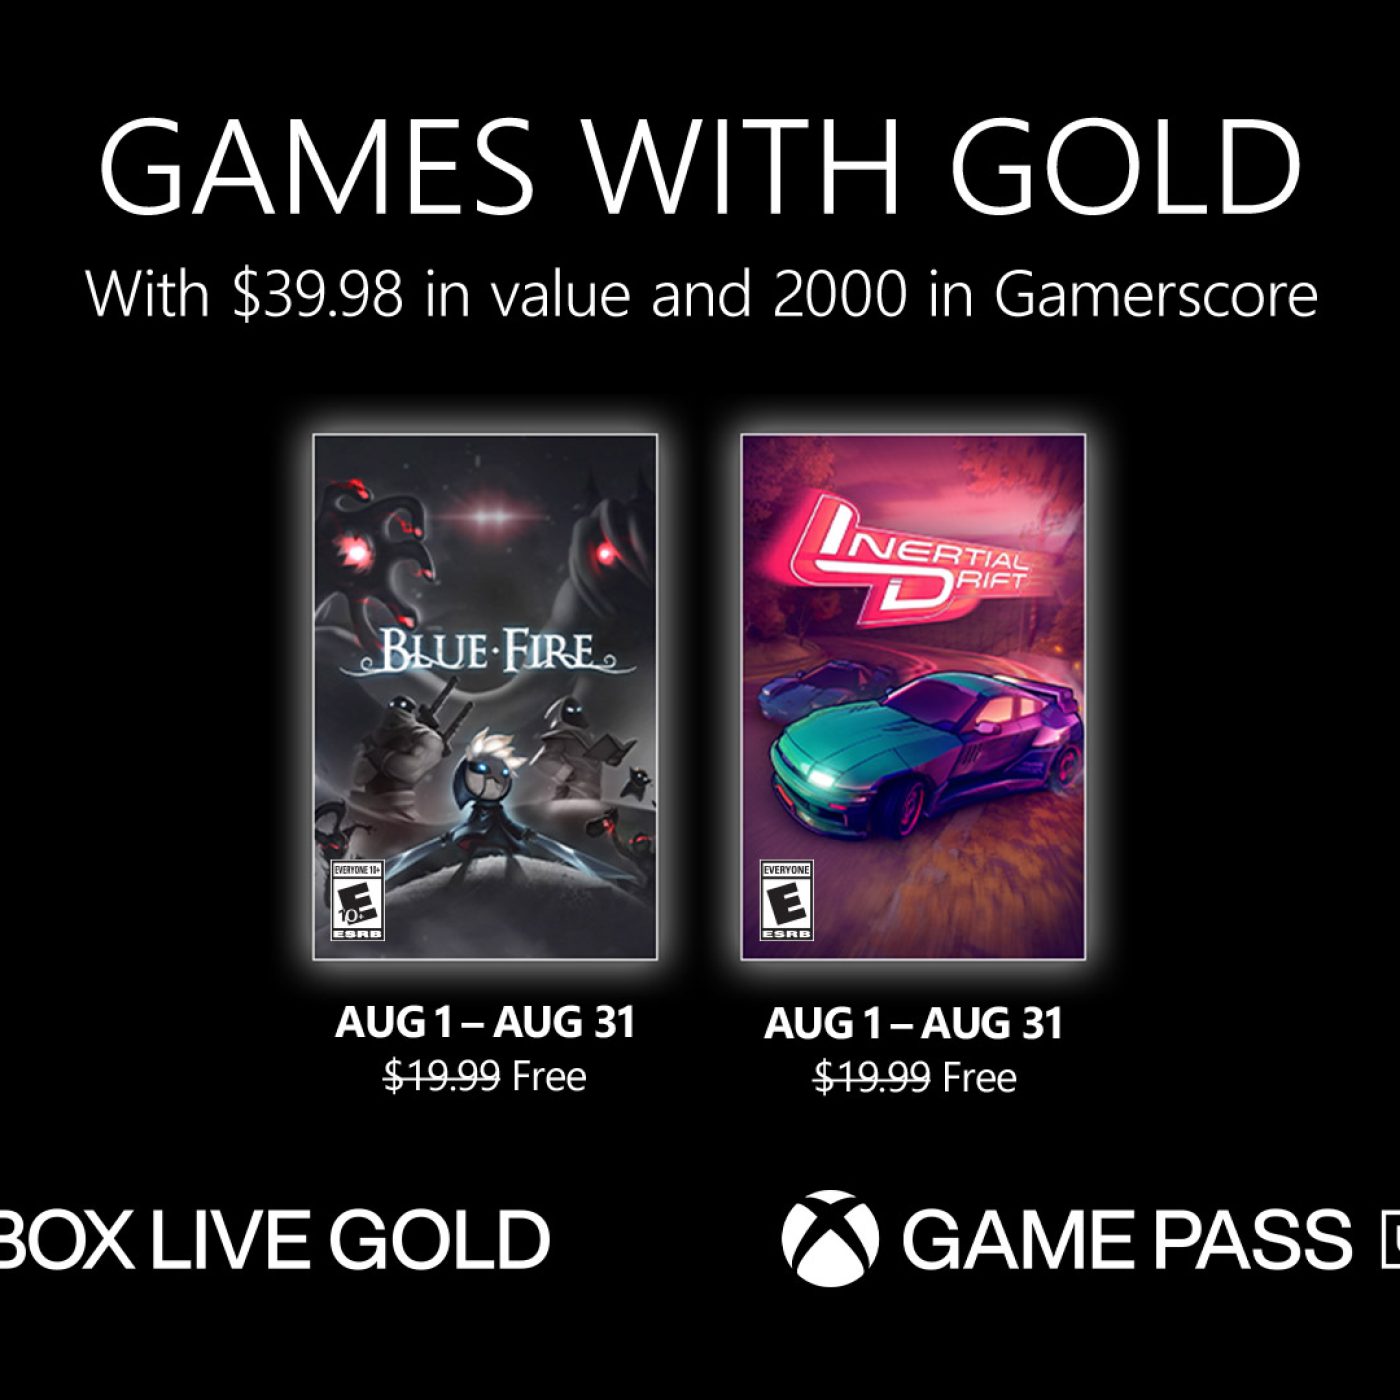 Microsoft to replace Xbox Live Gold with Game Pass Core in September